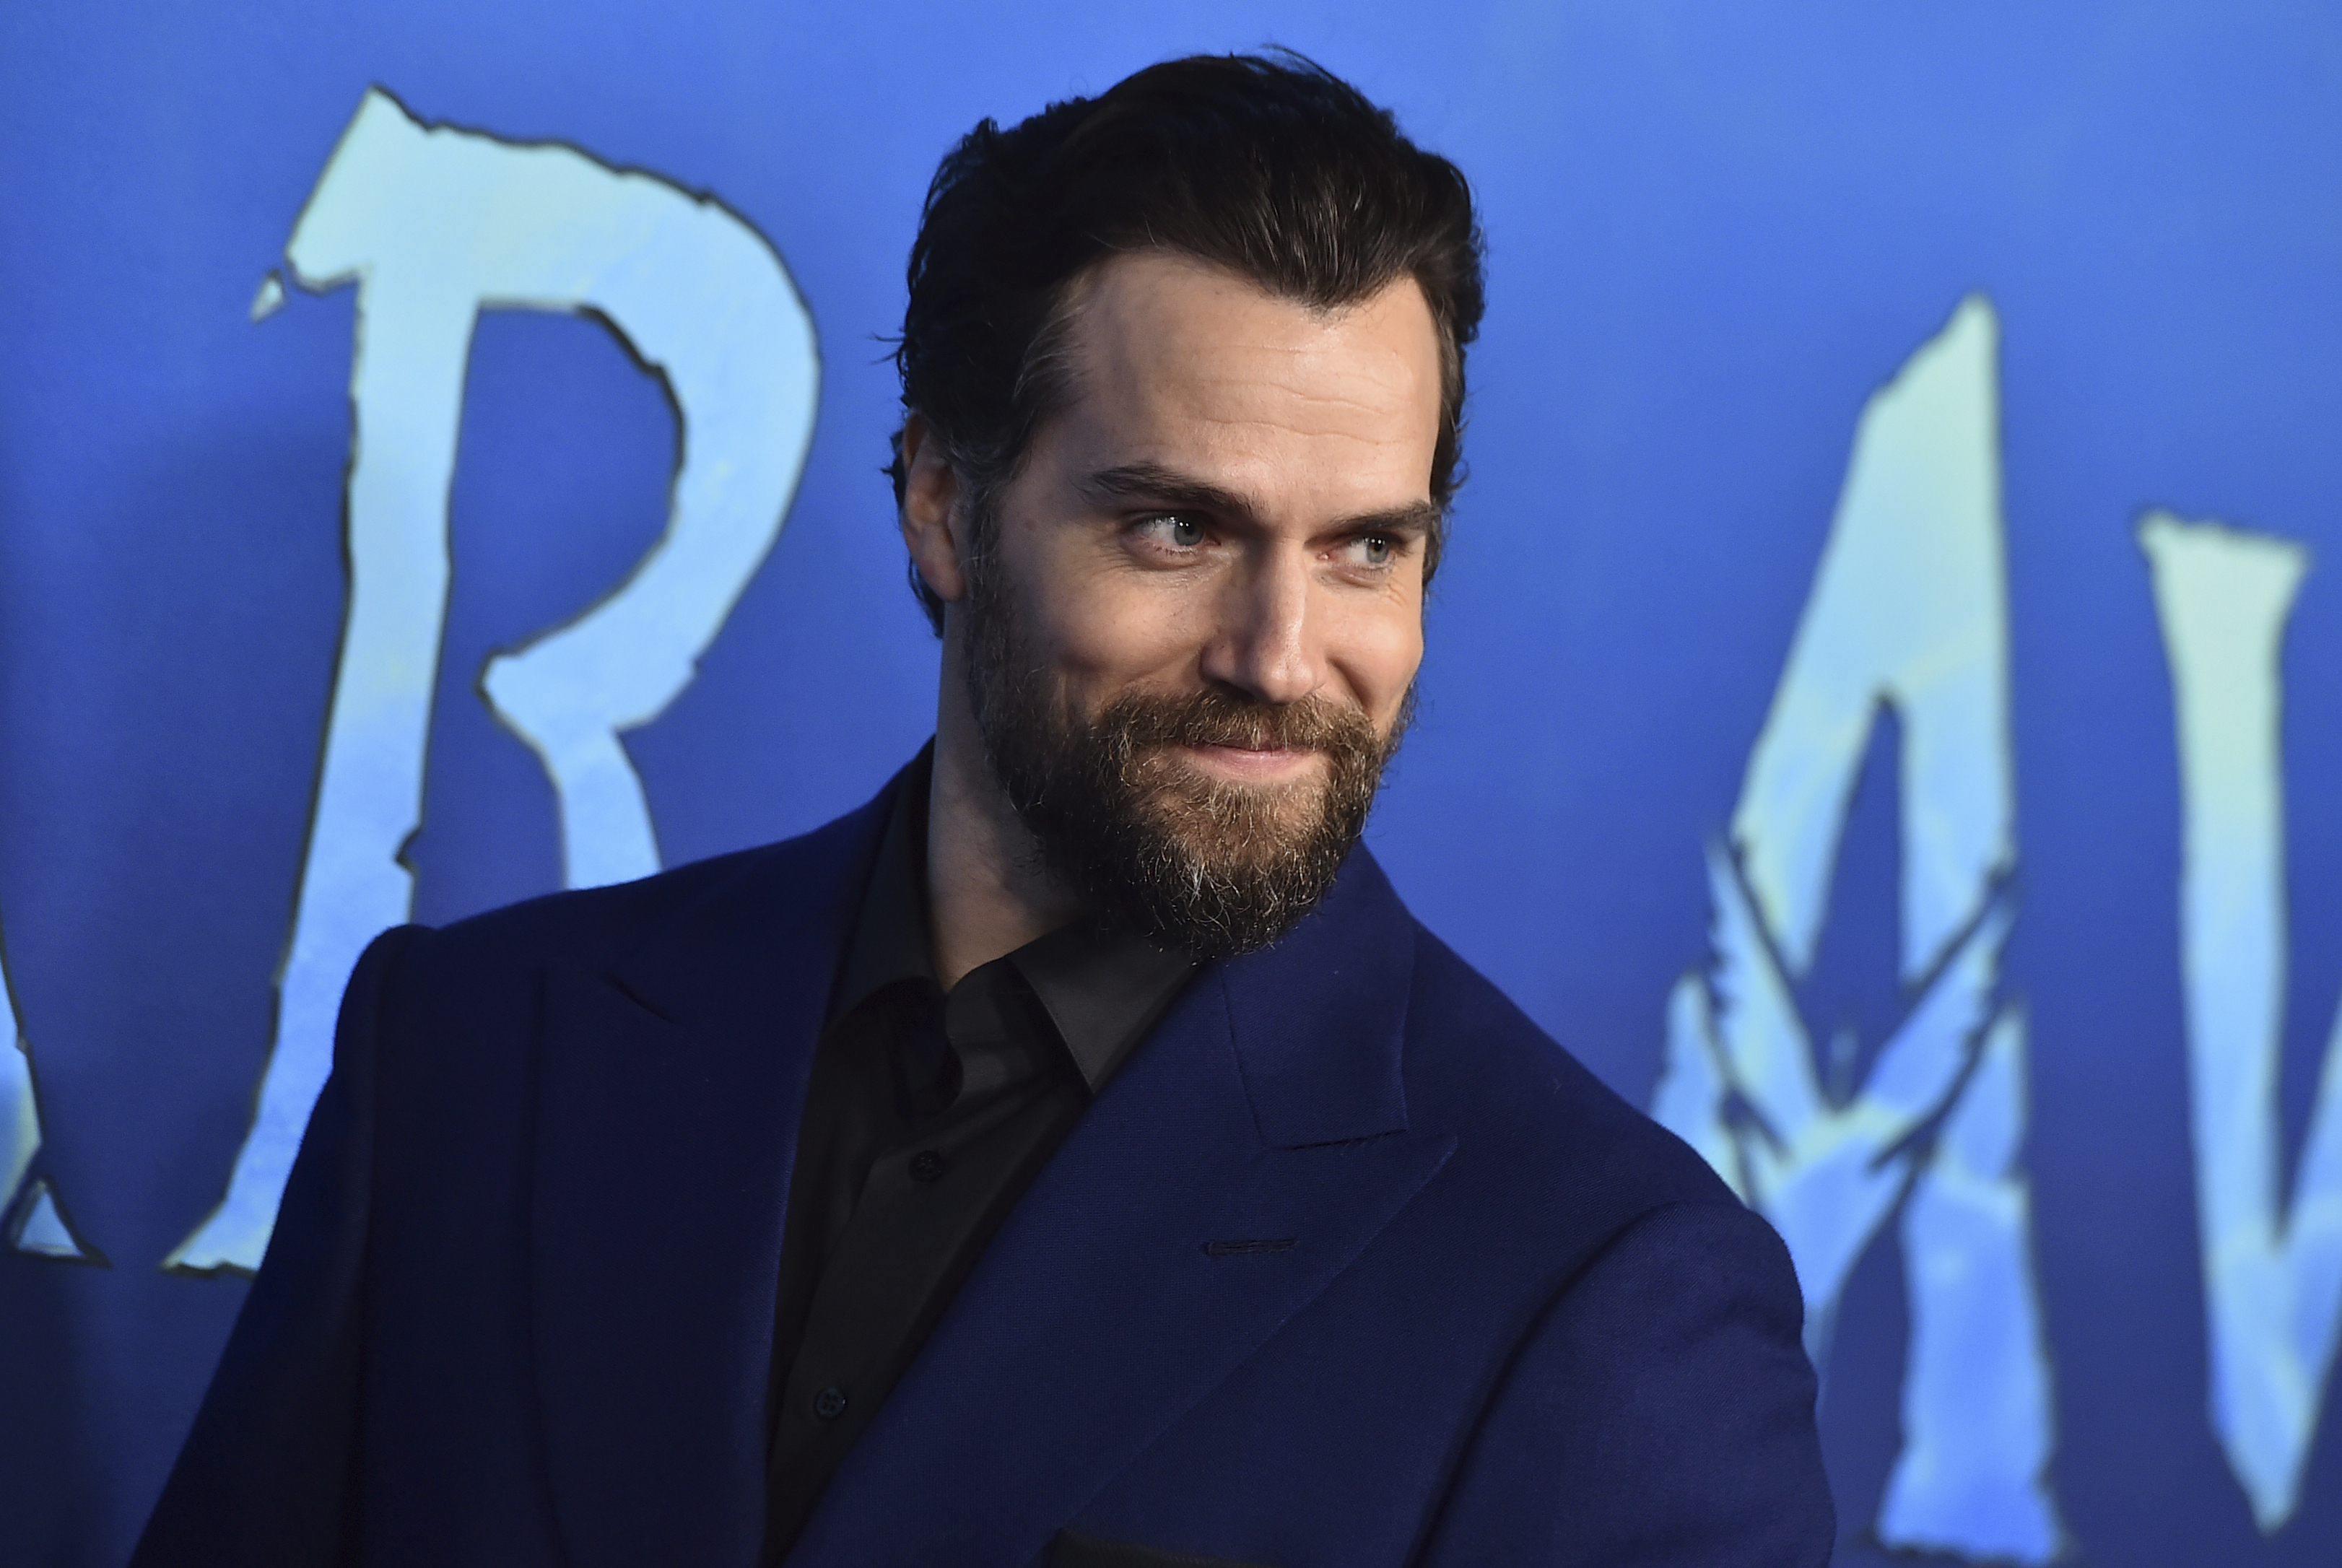 Henry Cavill: What To Watch Streaming If You Like The Superman